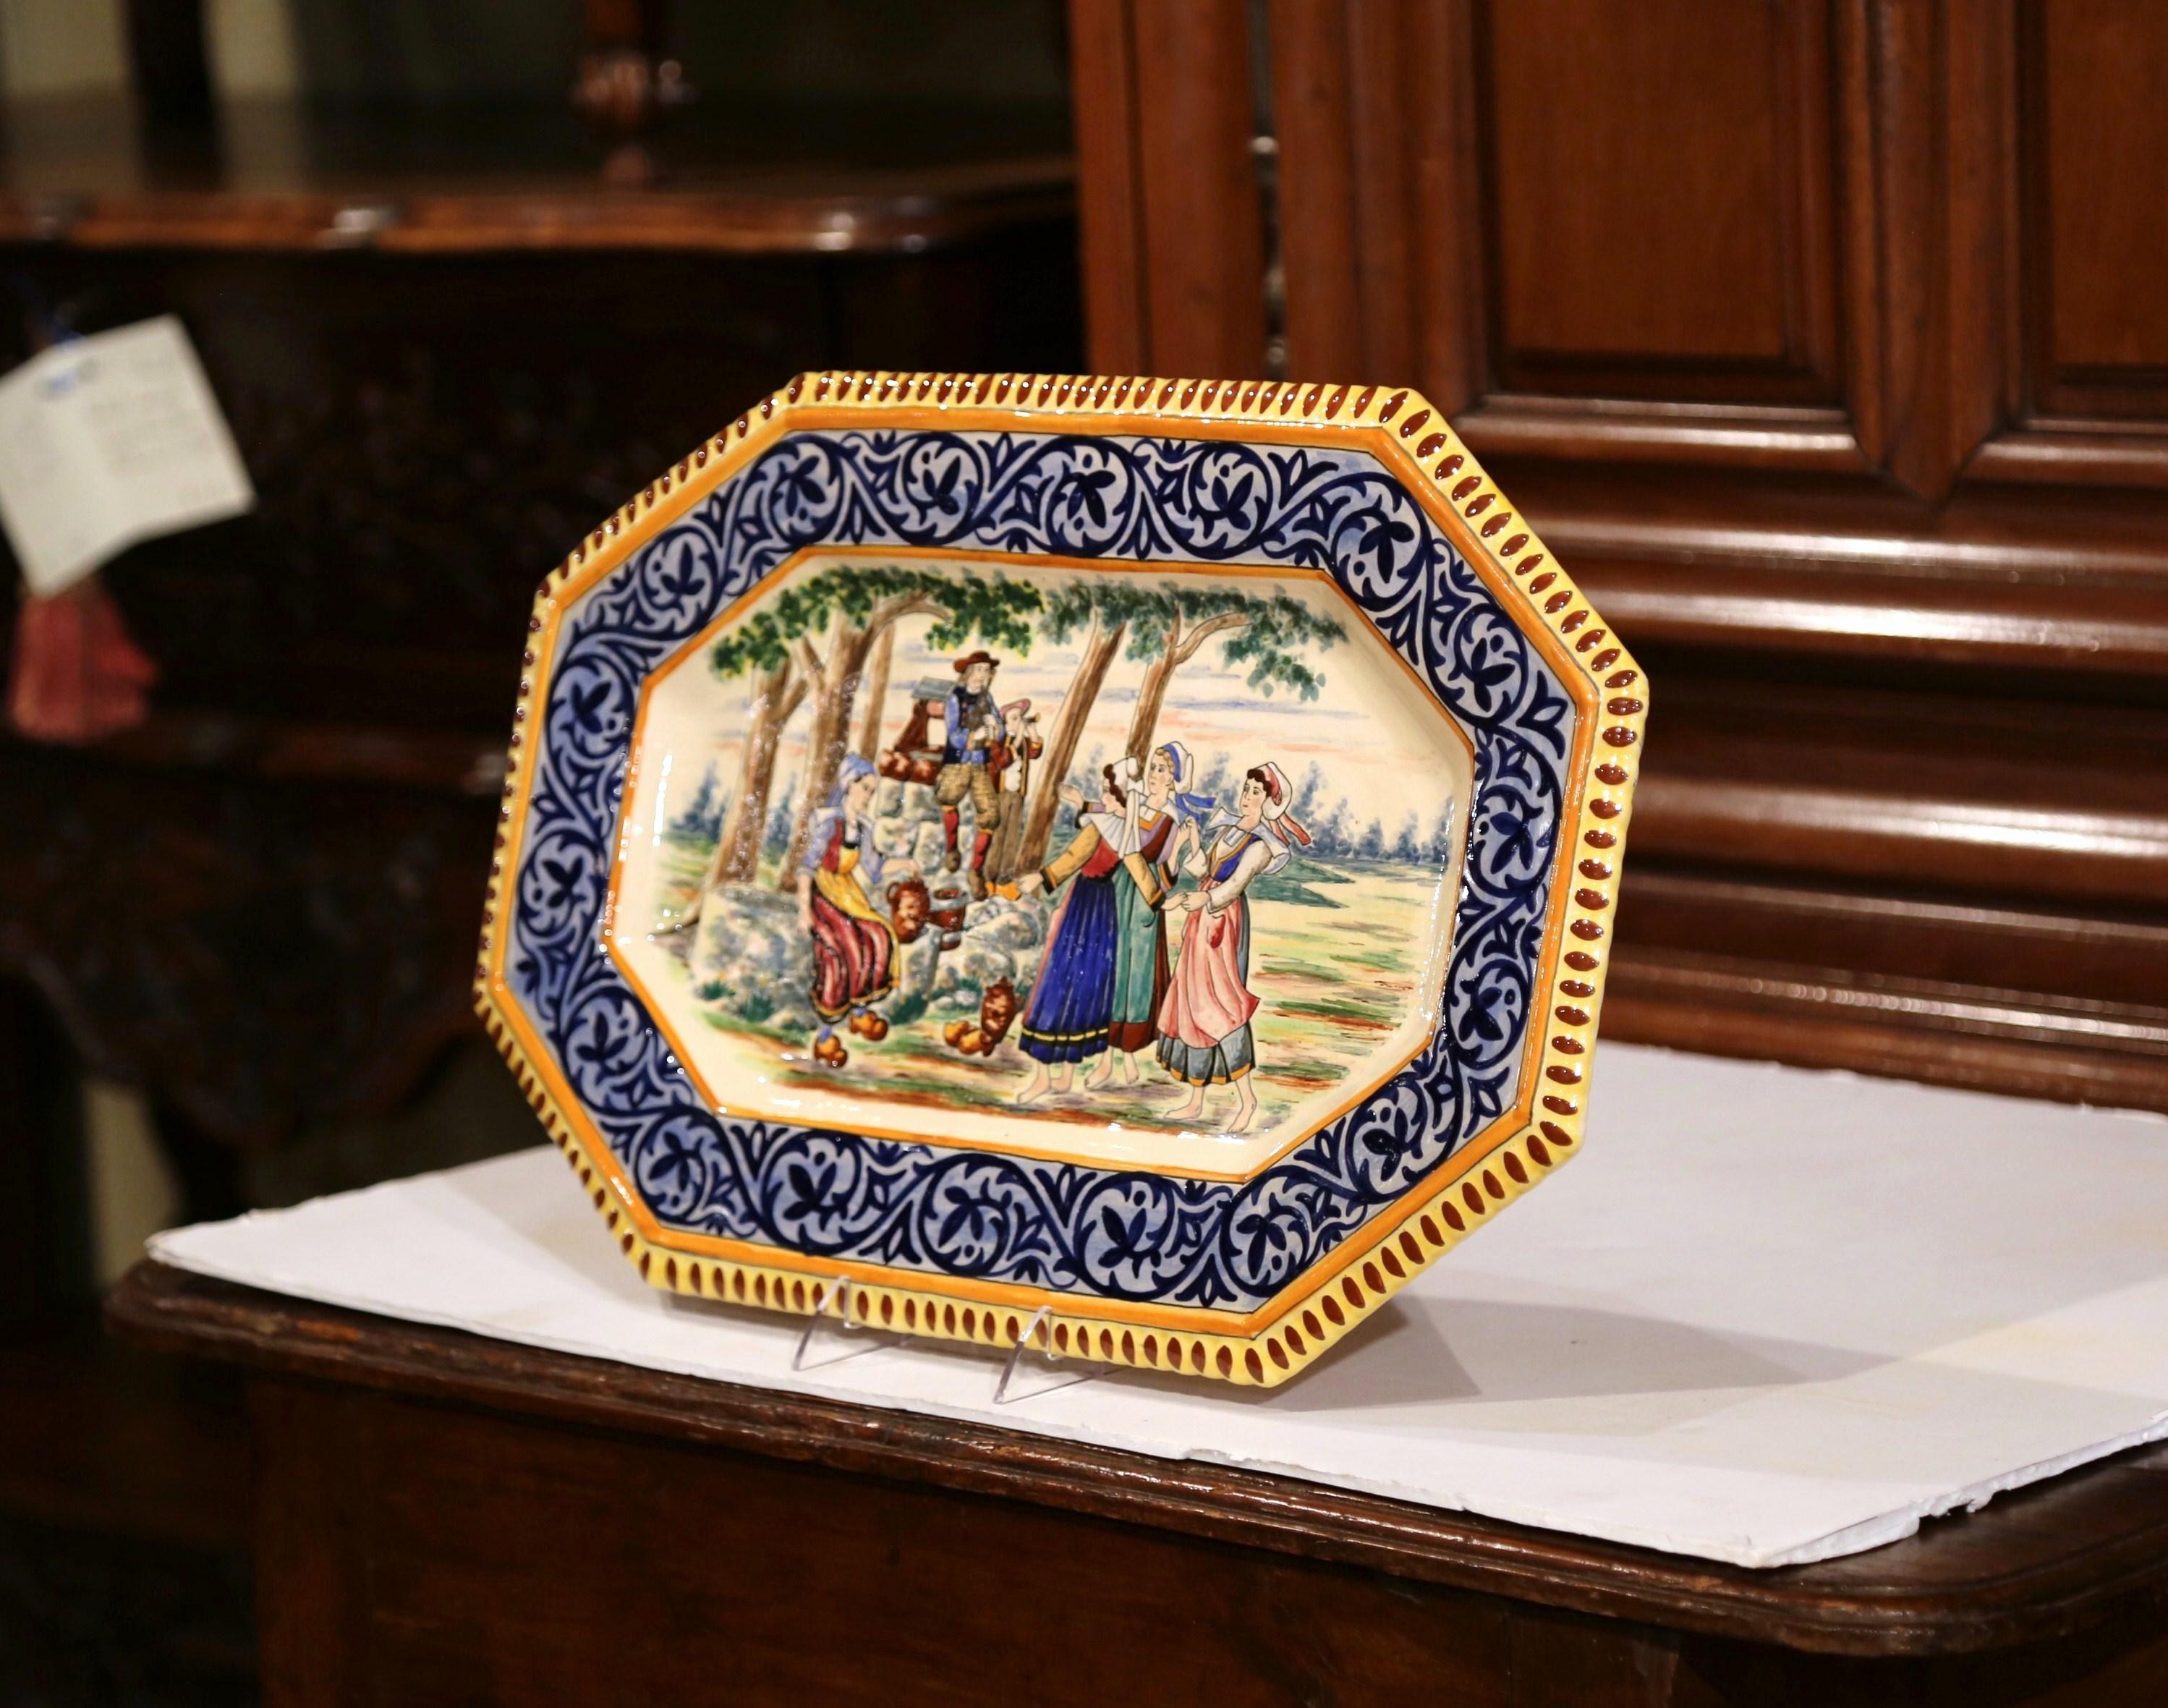 This large antique and colorful wall plate was created in Brittany, circa 1870. Hand painted in the blue and yellow palette and signed on the back HB Quimper, the ceramic platter has a large blue and yellow border and features Briton people in